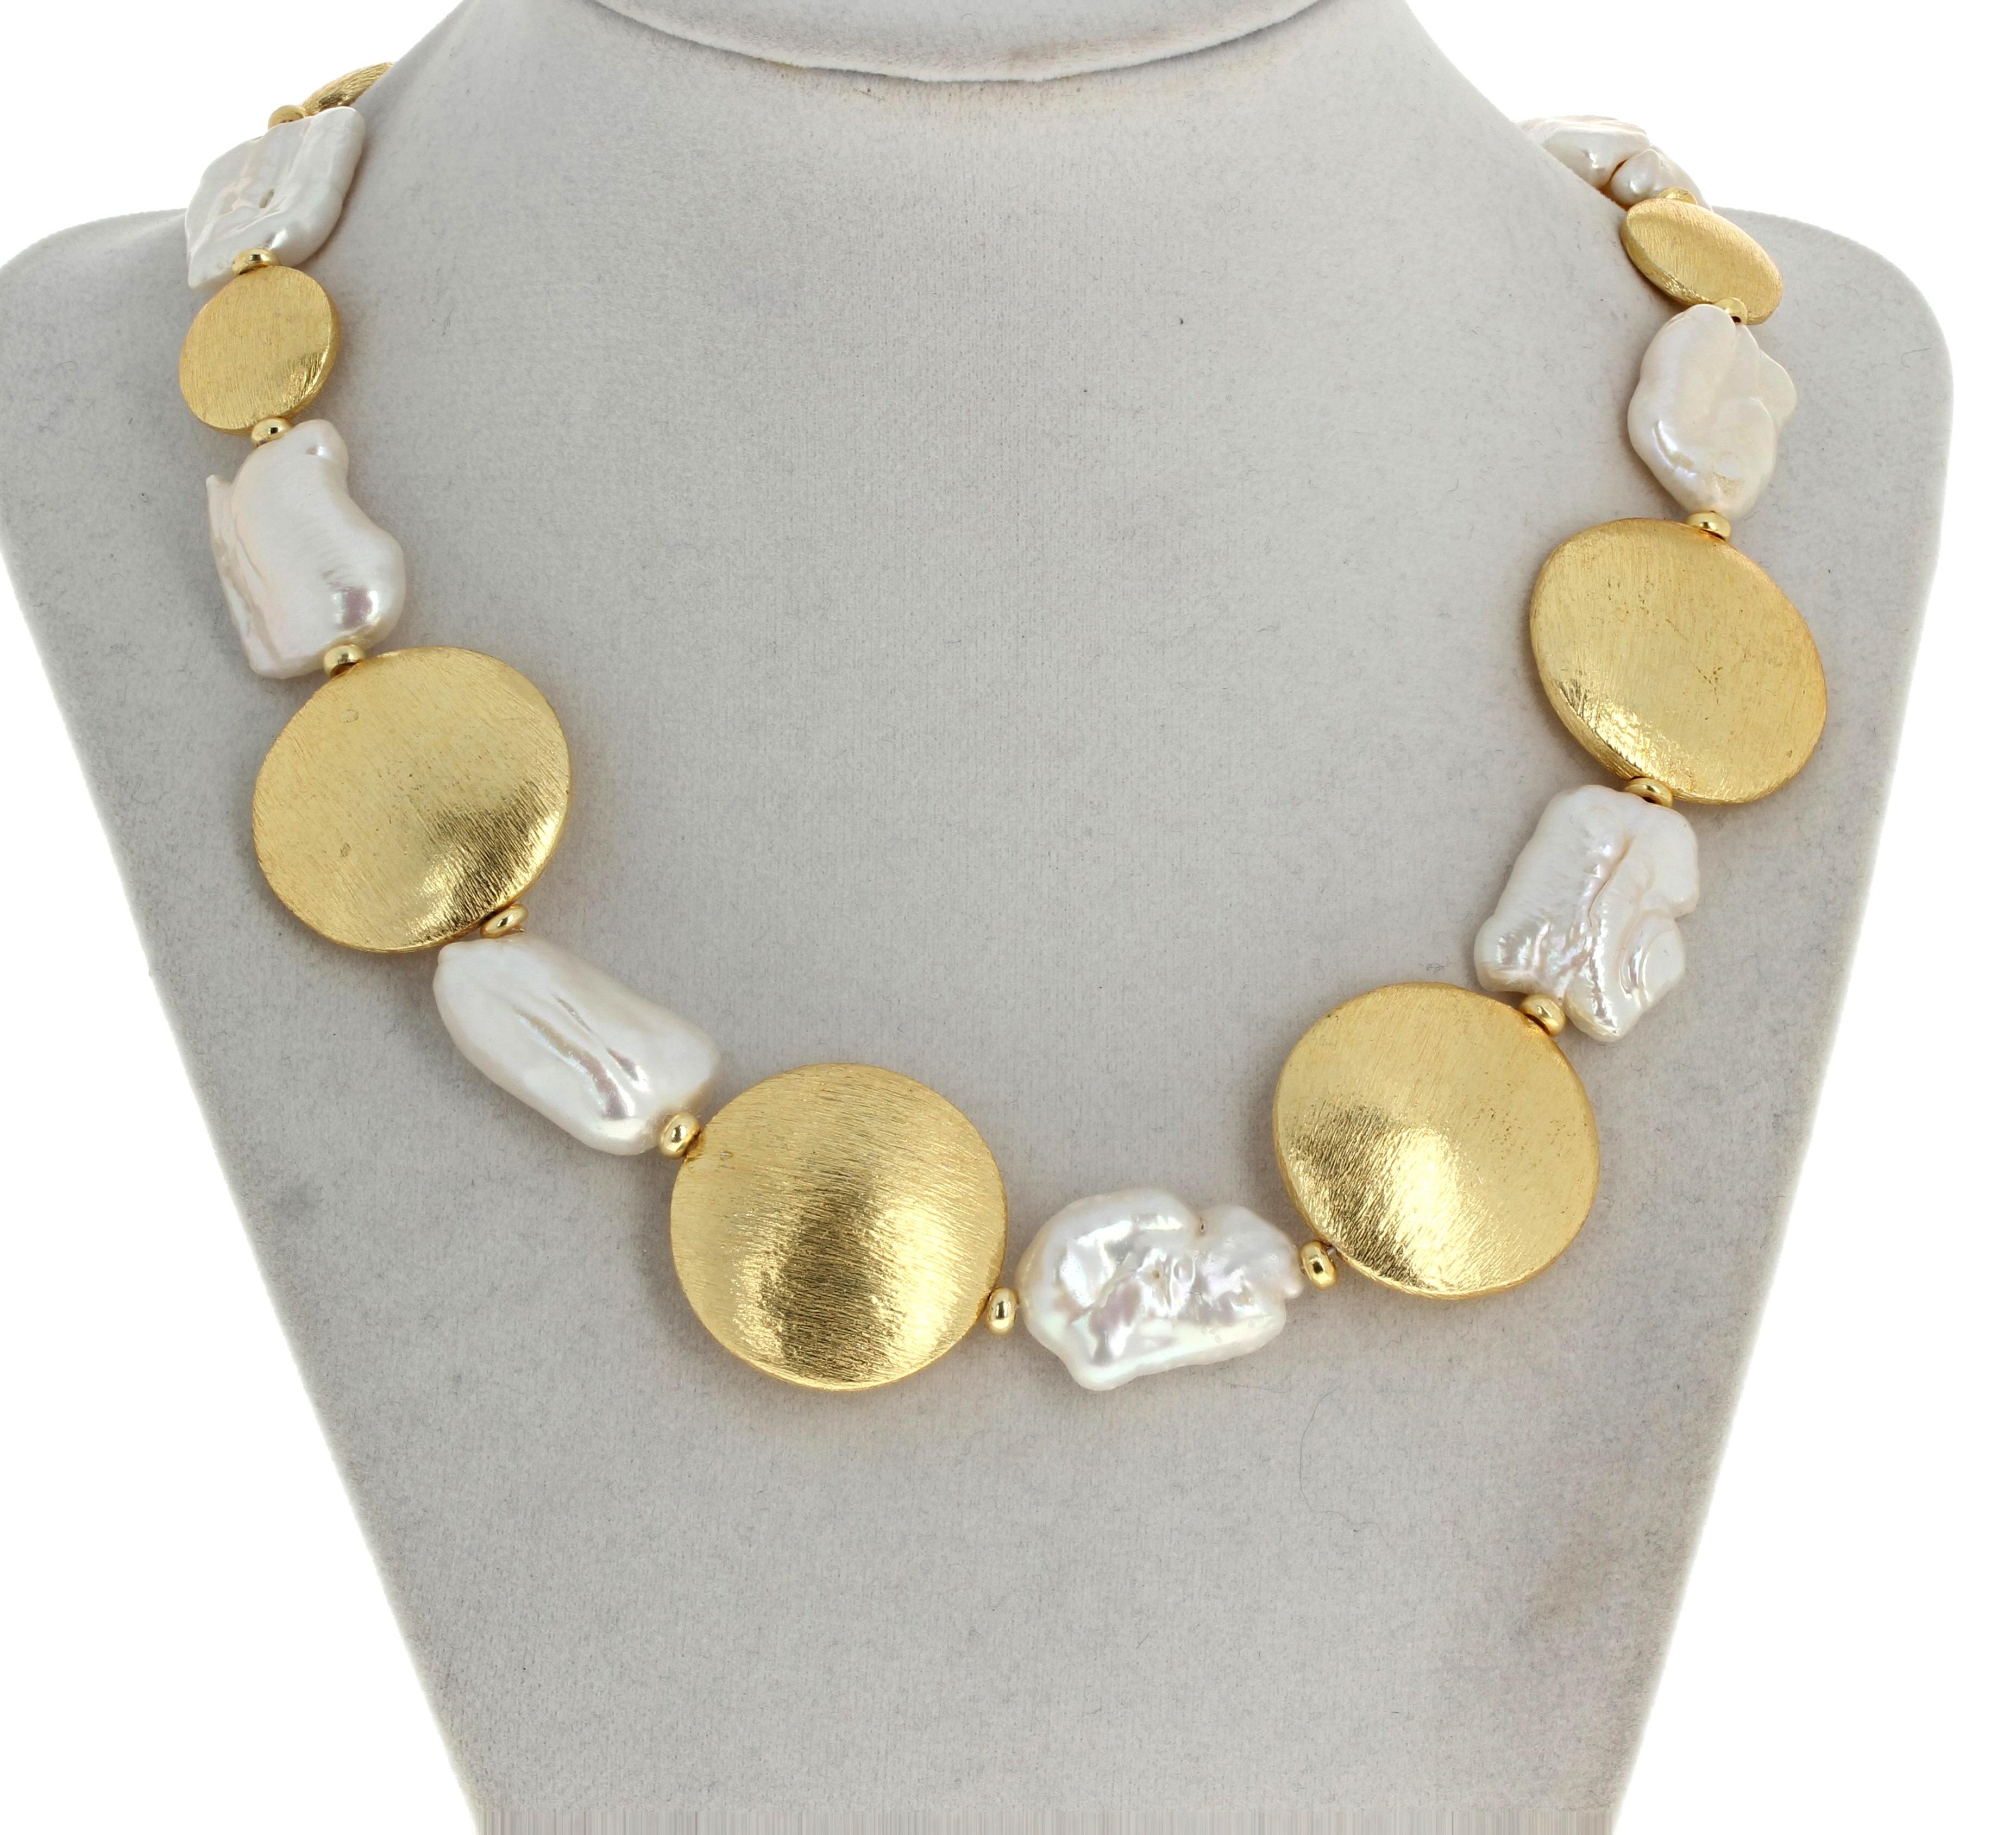 This elegant goldy glowing rondels necklace is 18 1/2 inches long.  The larger goldy rondels are approximately 28 mm and the real natural white Pearls are 22mm x 14mm and the little tiny rondel goldy spacers are approximately 5mm.  The gold plated